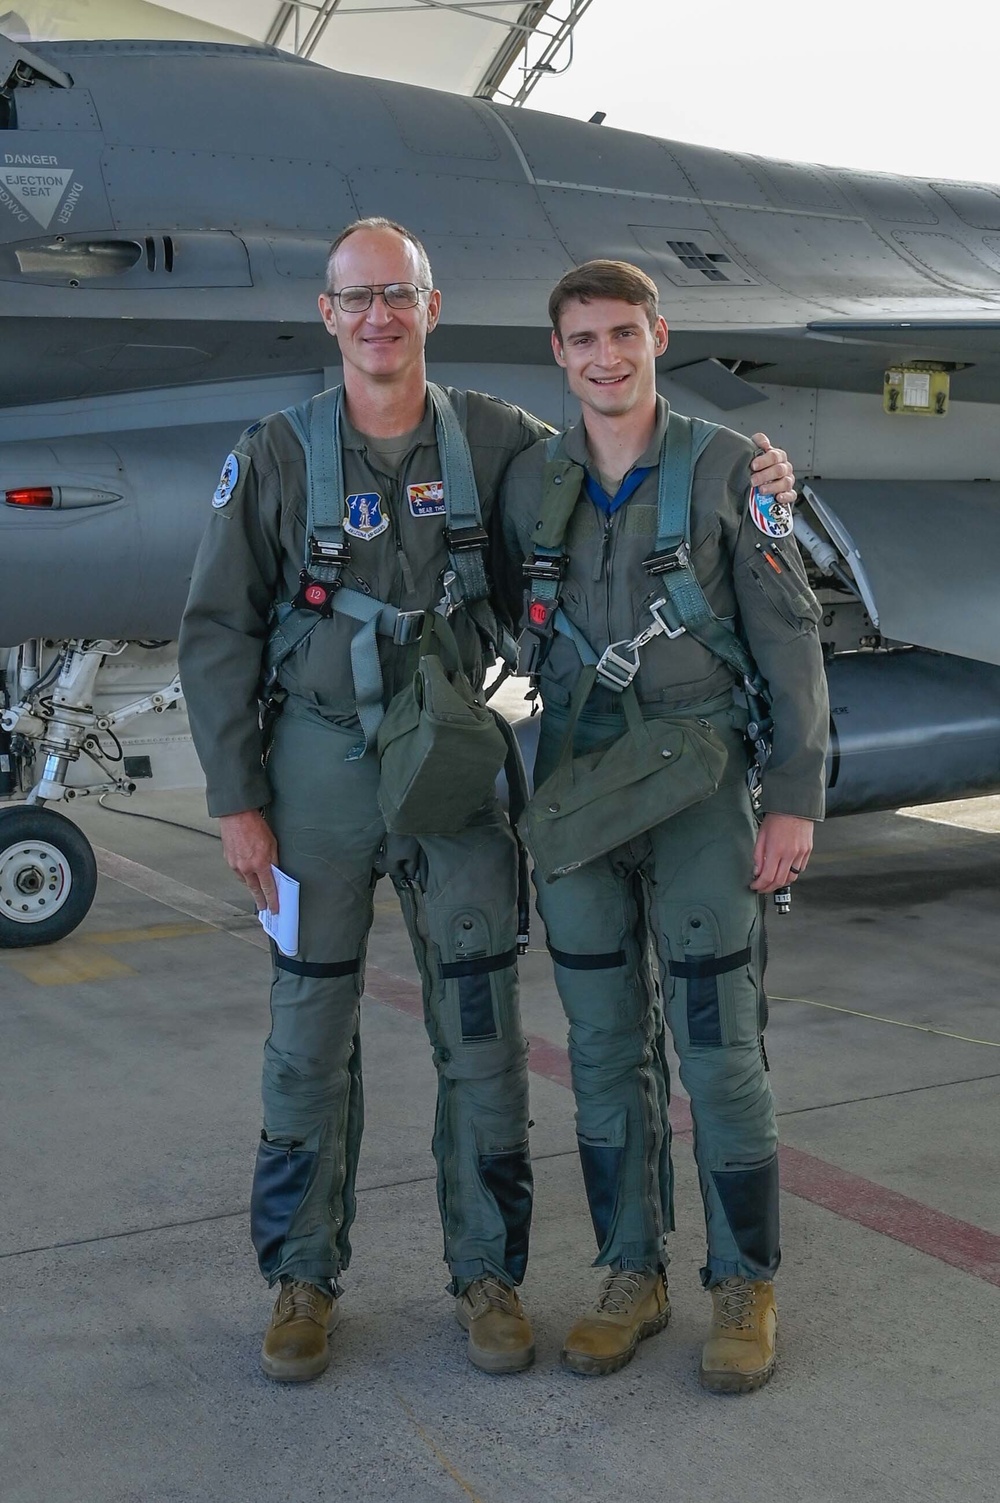 Son takes flight following family’s legacy